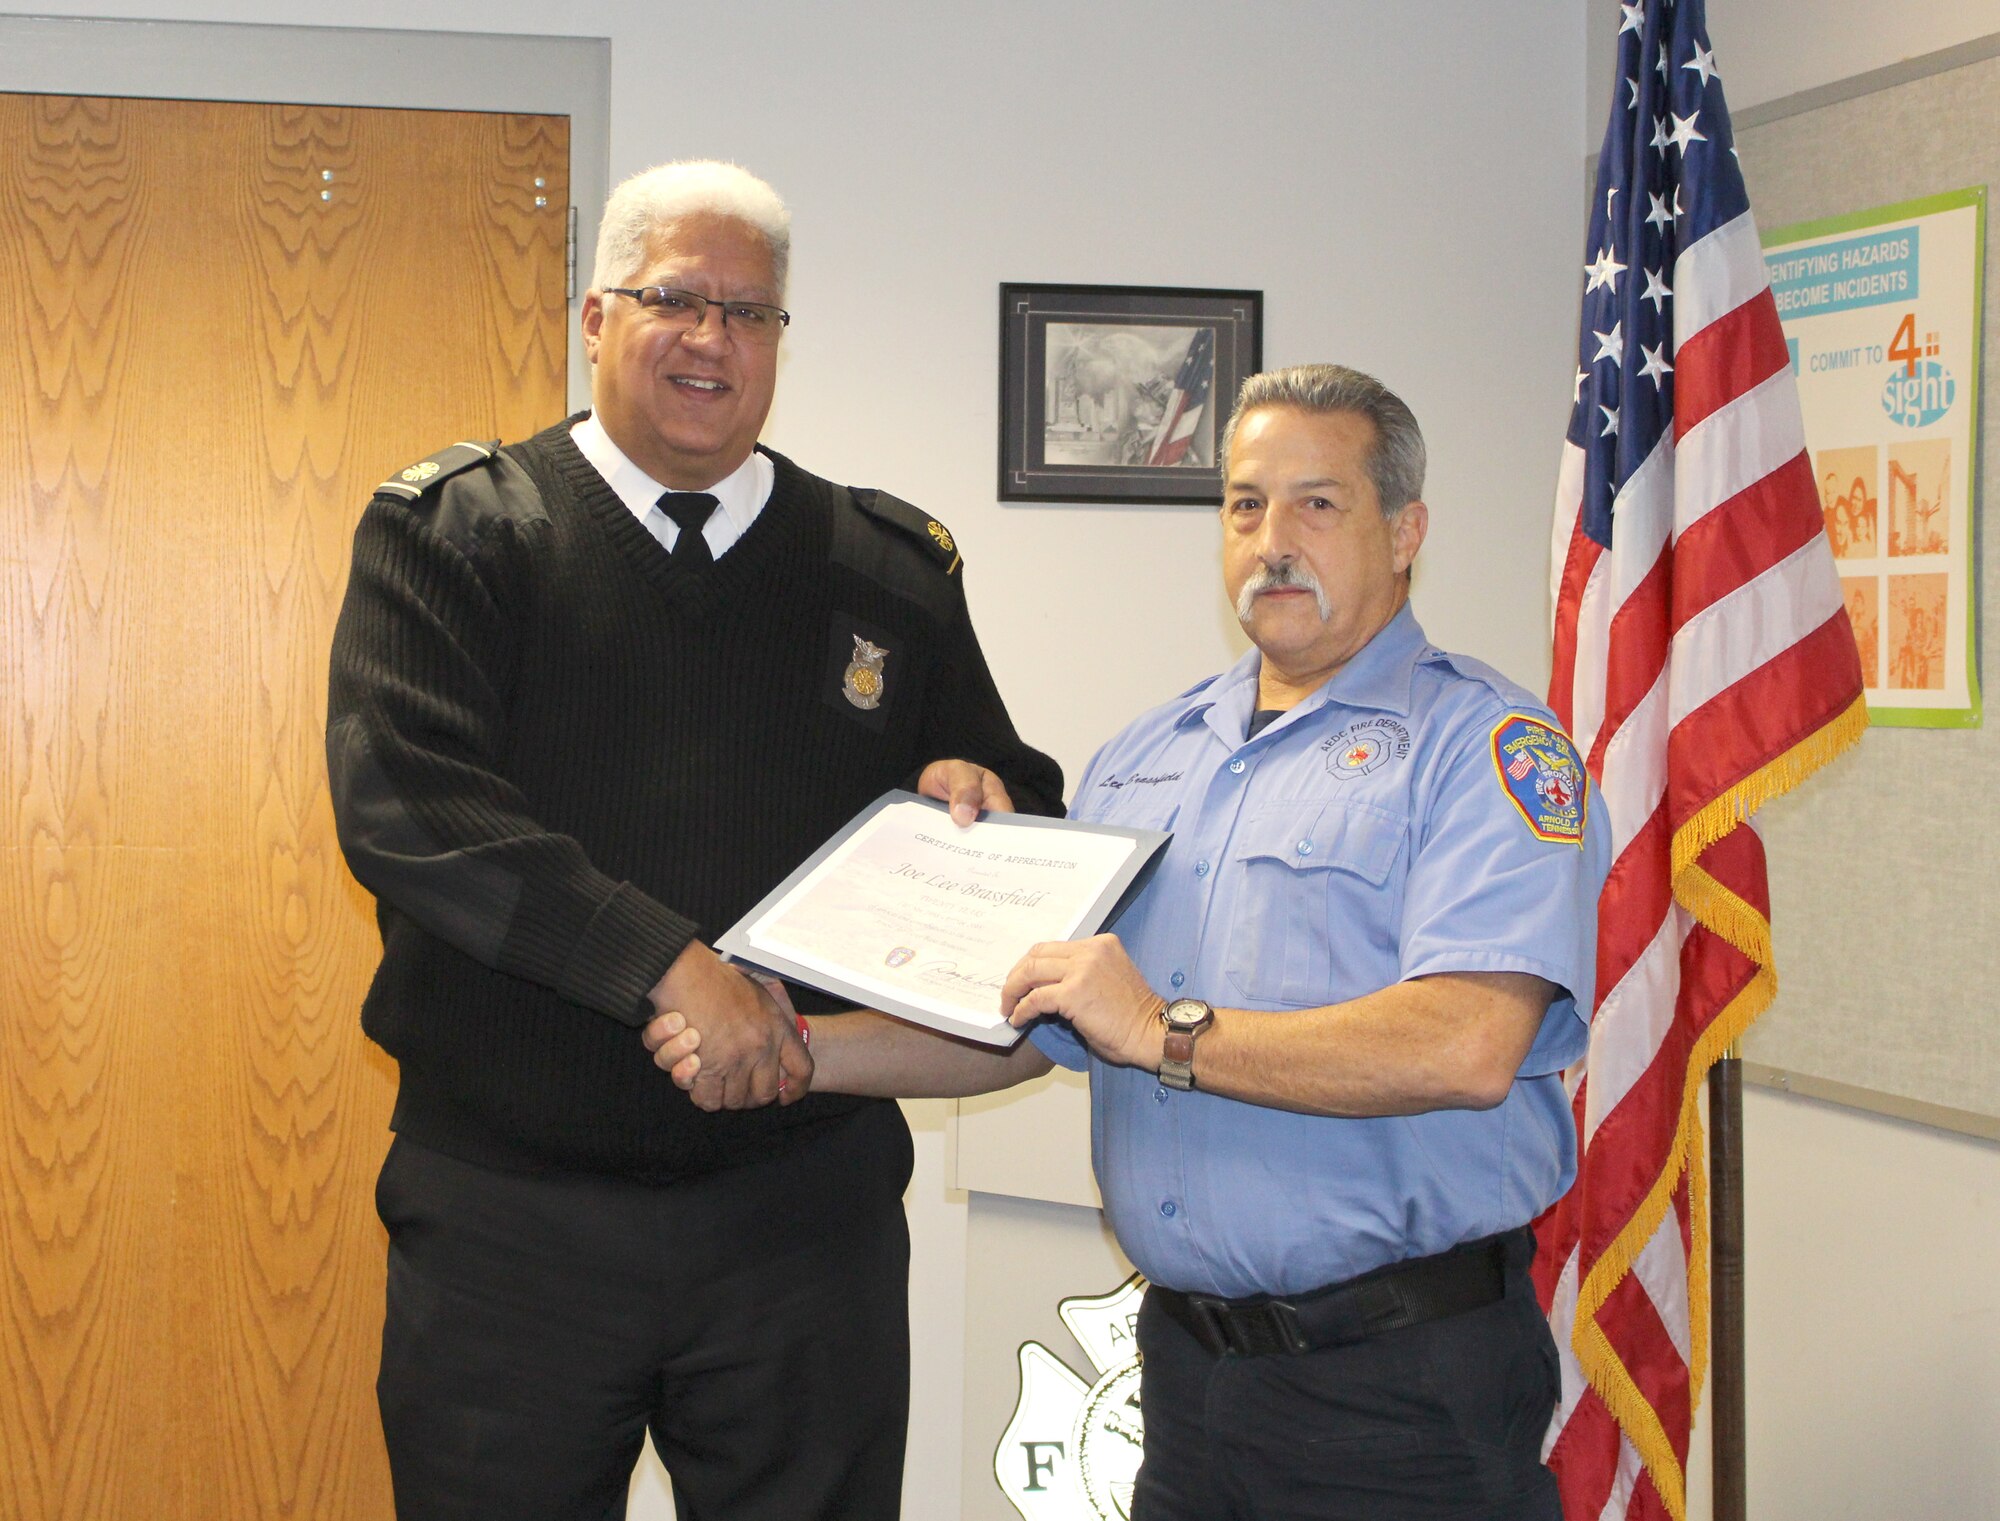 Joe Lee Brassfield, right, driver/operator for Arnold Air Force Base Fire and Emergency Services, receives a certificate recognizing his 20 years of service from Daryle Lopes, chief of Arnold Fire and Emergency Services. (U.S. Air Force photo by Deidre Ortiz)